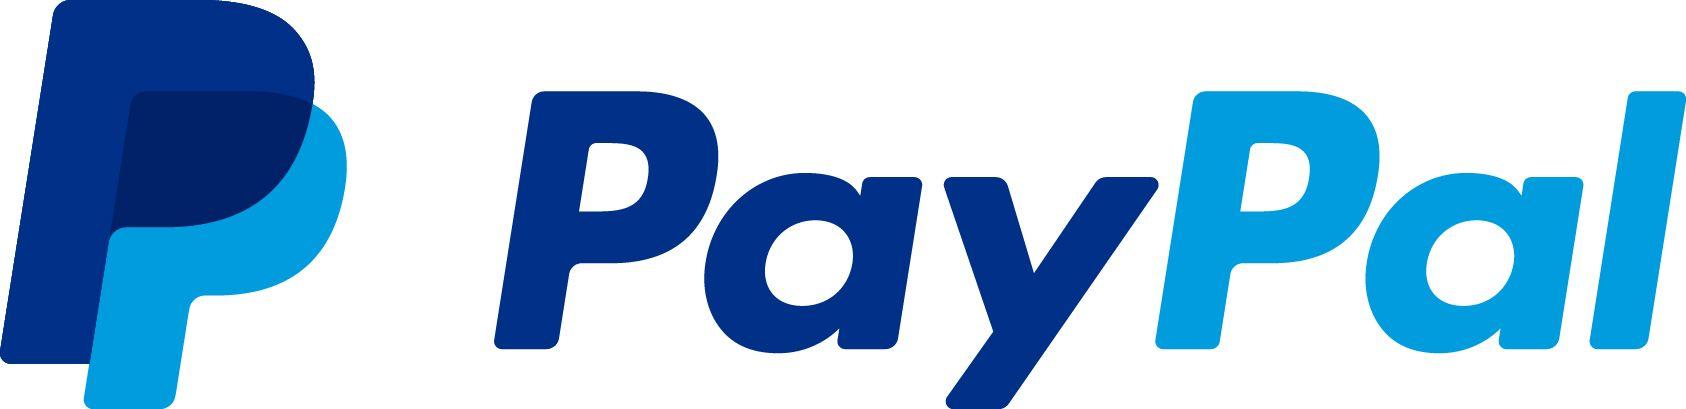 PayPal App Logo - Media Resources - PayPal Stories